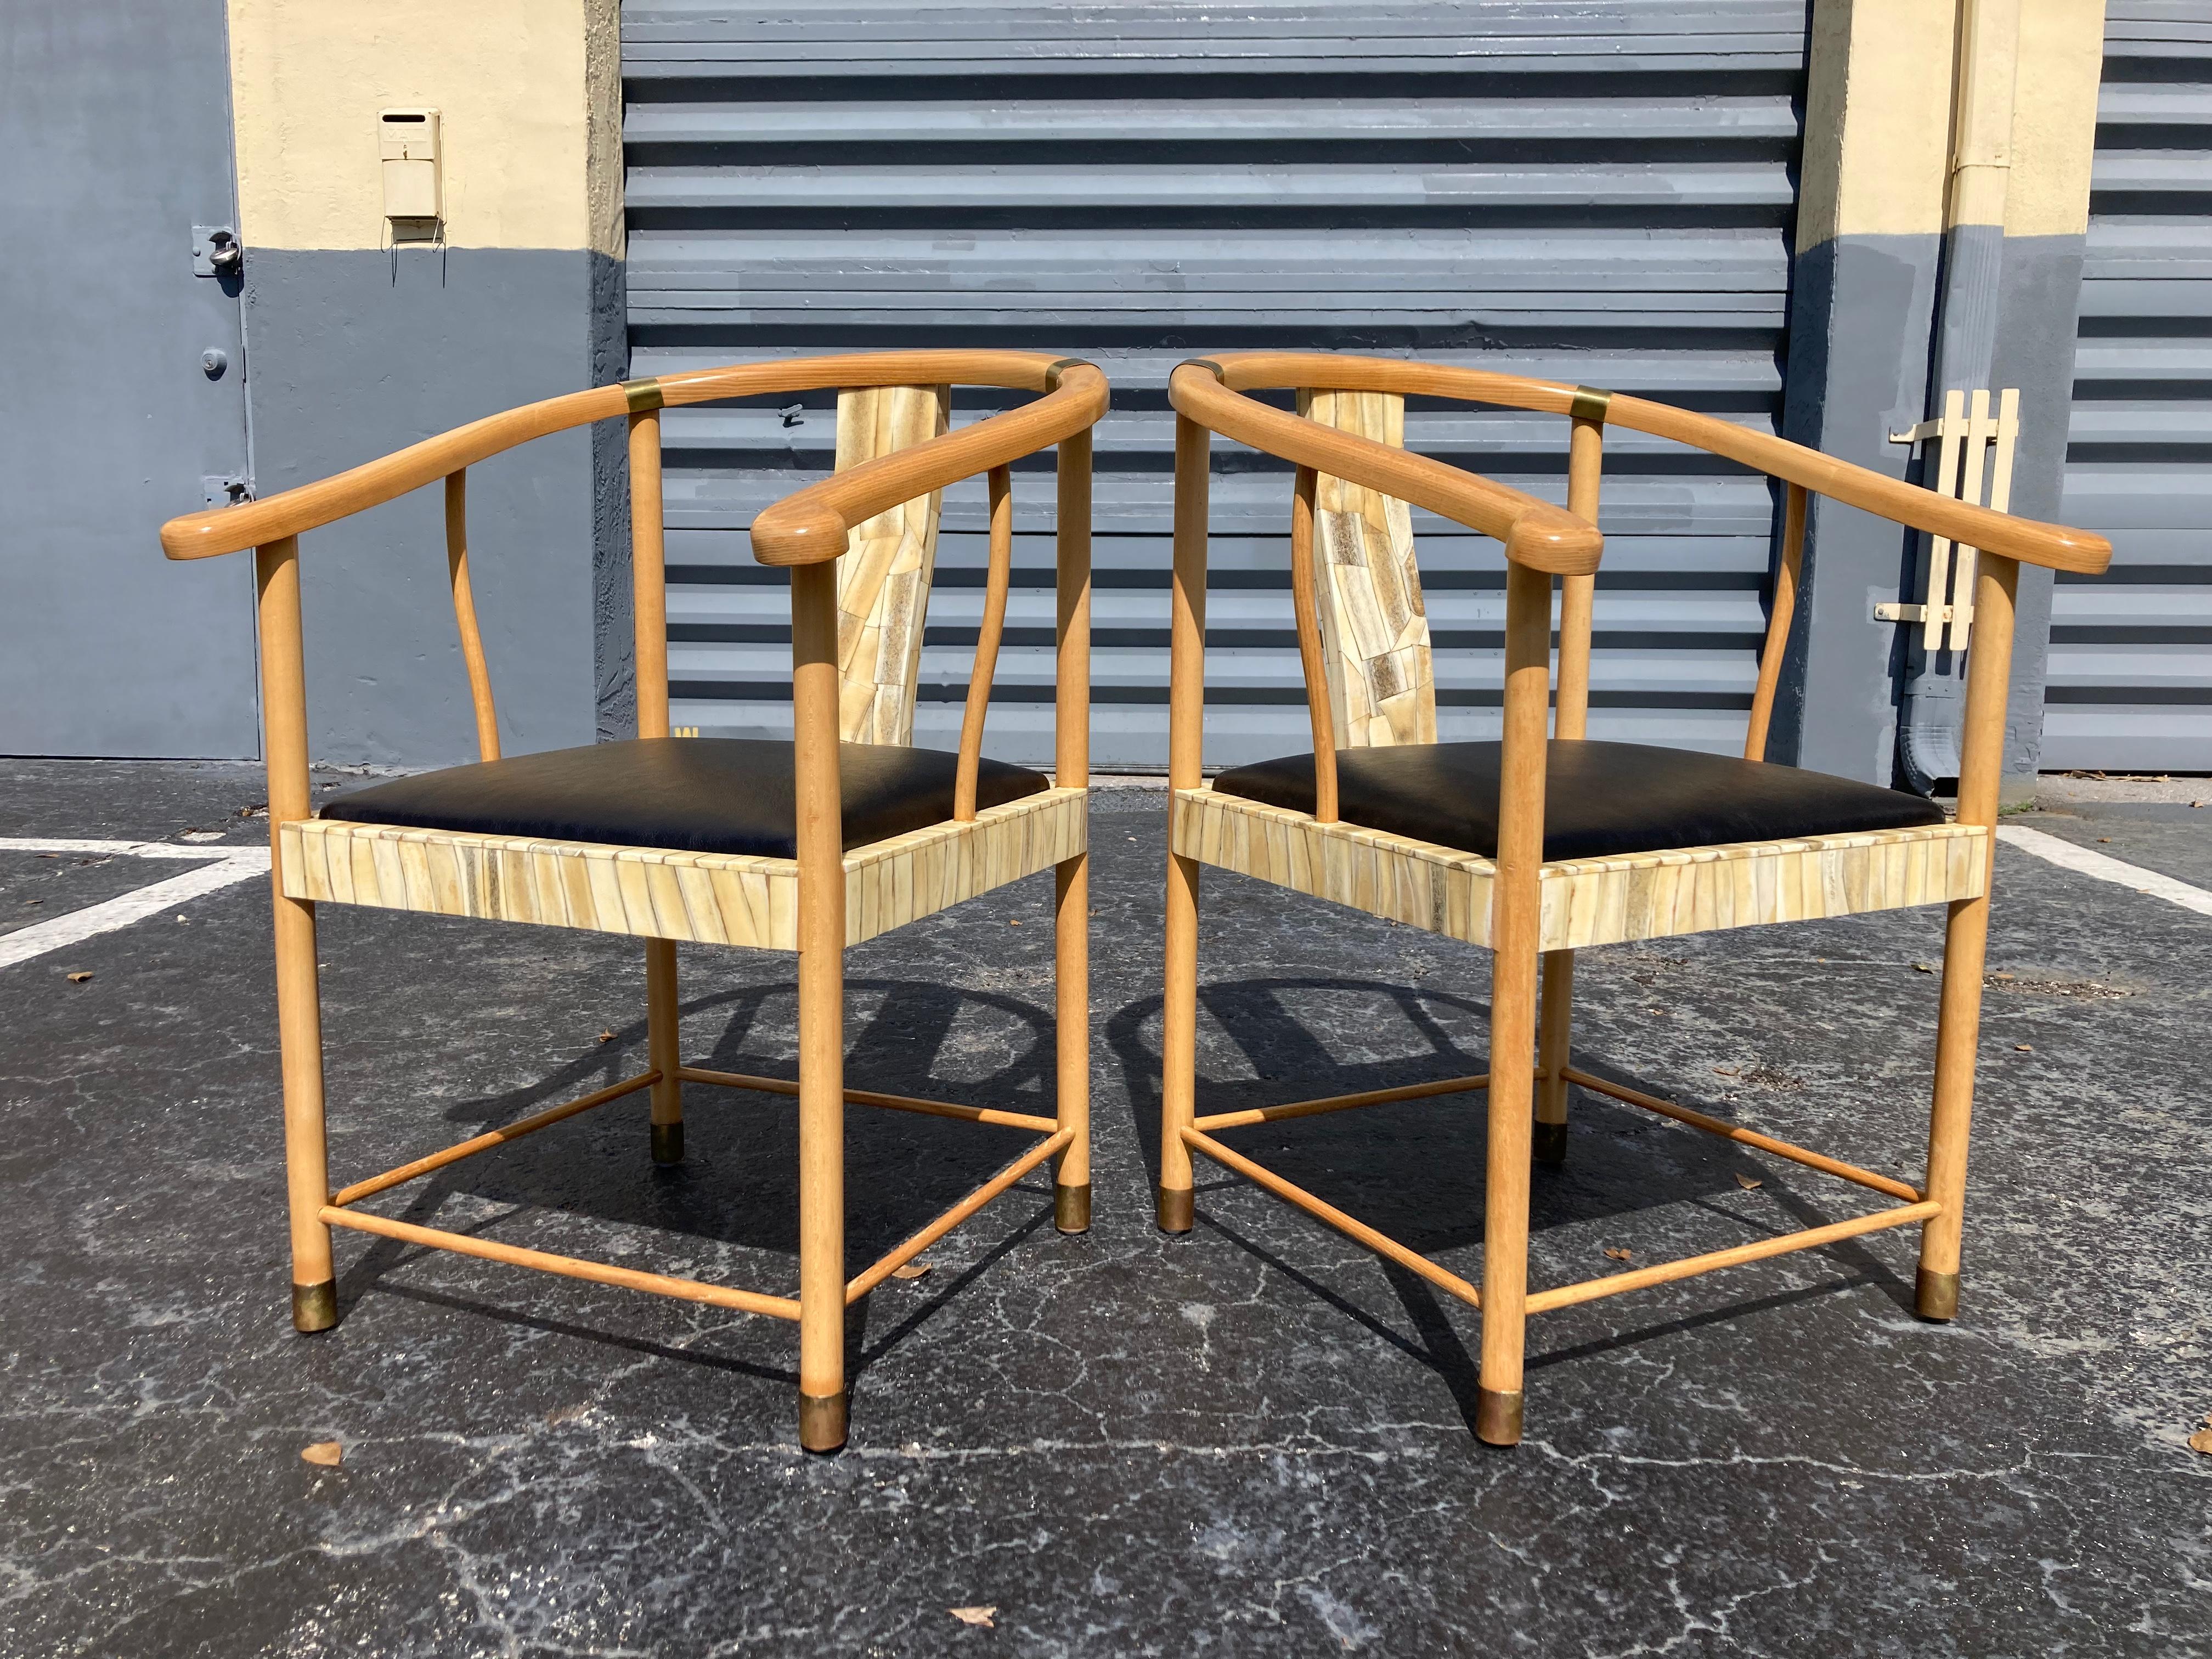 Fabulous pair of designer chairs with black leather seat cushions. Chairs are partly covered in bone with brass details. Please see all pictures. Four chairs in total available. Price is for the pair.